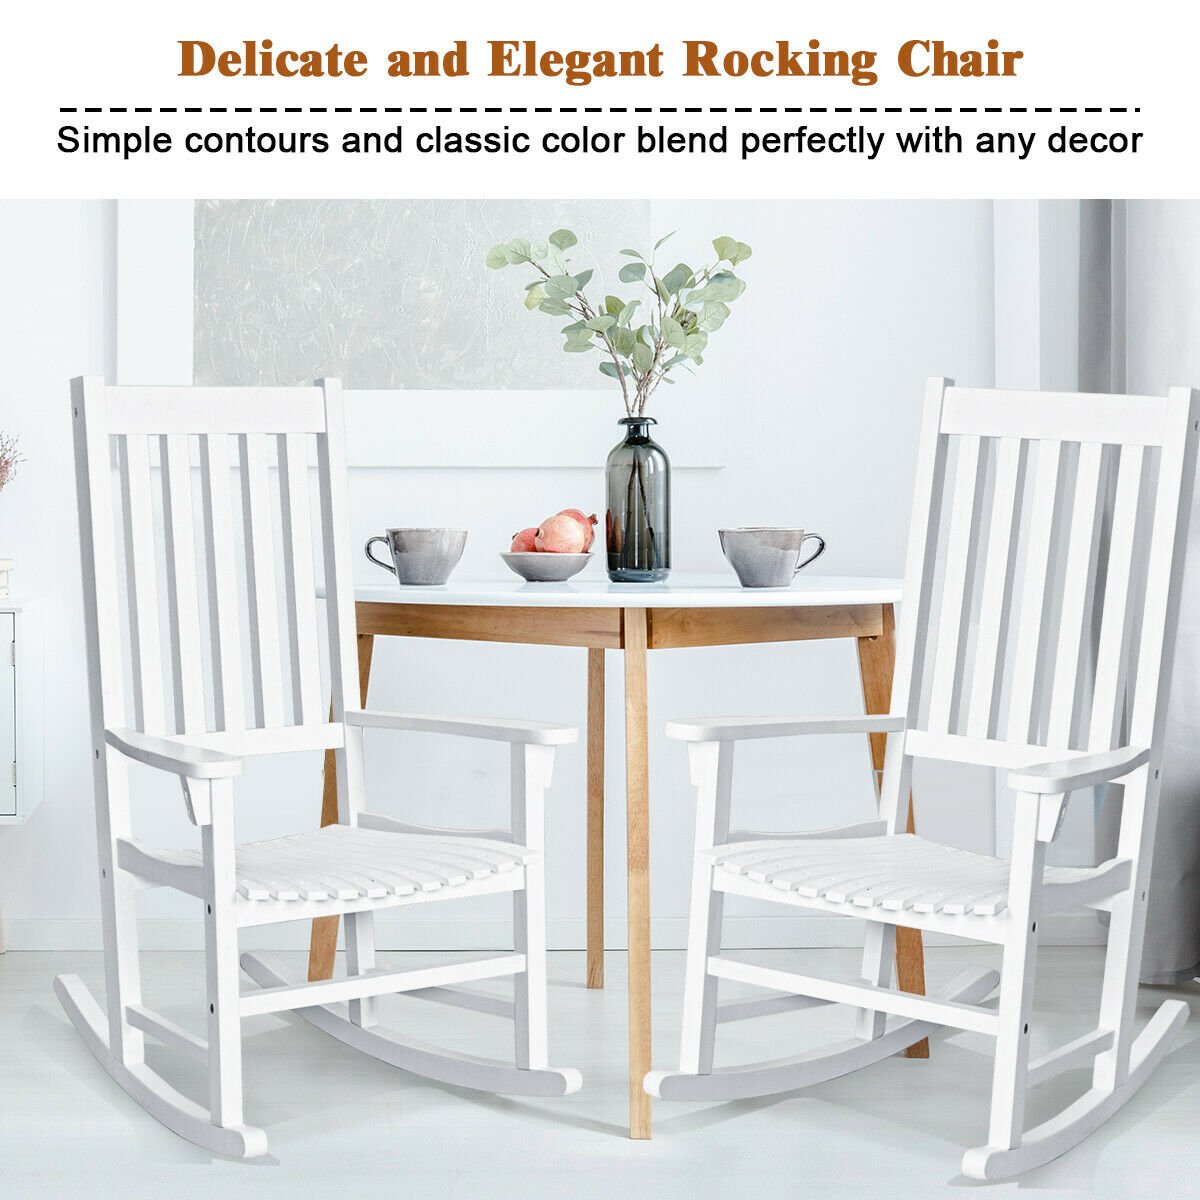 Indoor Outdoor Wooden High Back Rocking Chair, White at Gallery Canada